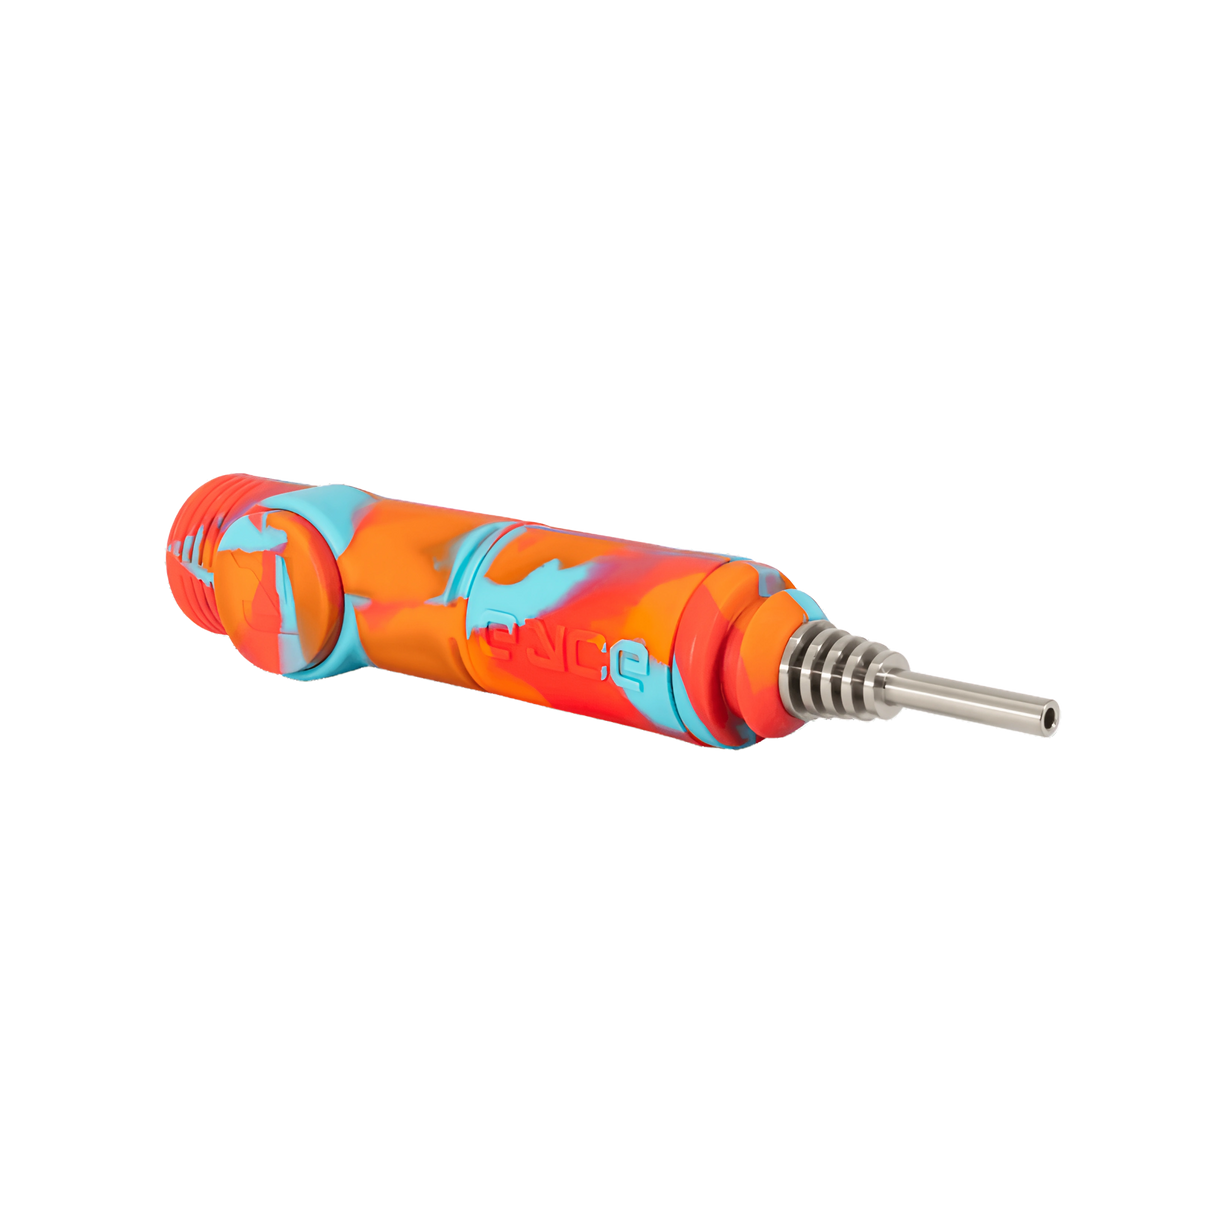 Eyce Collector silicone dab straw in vibrant colors with titanium tip, side view, for concentrates